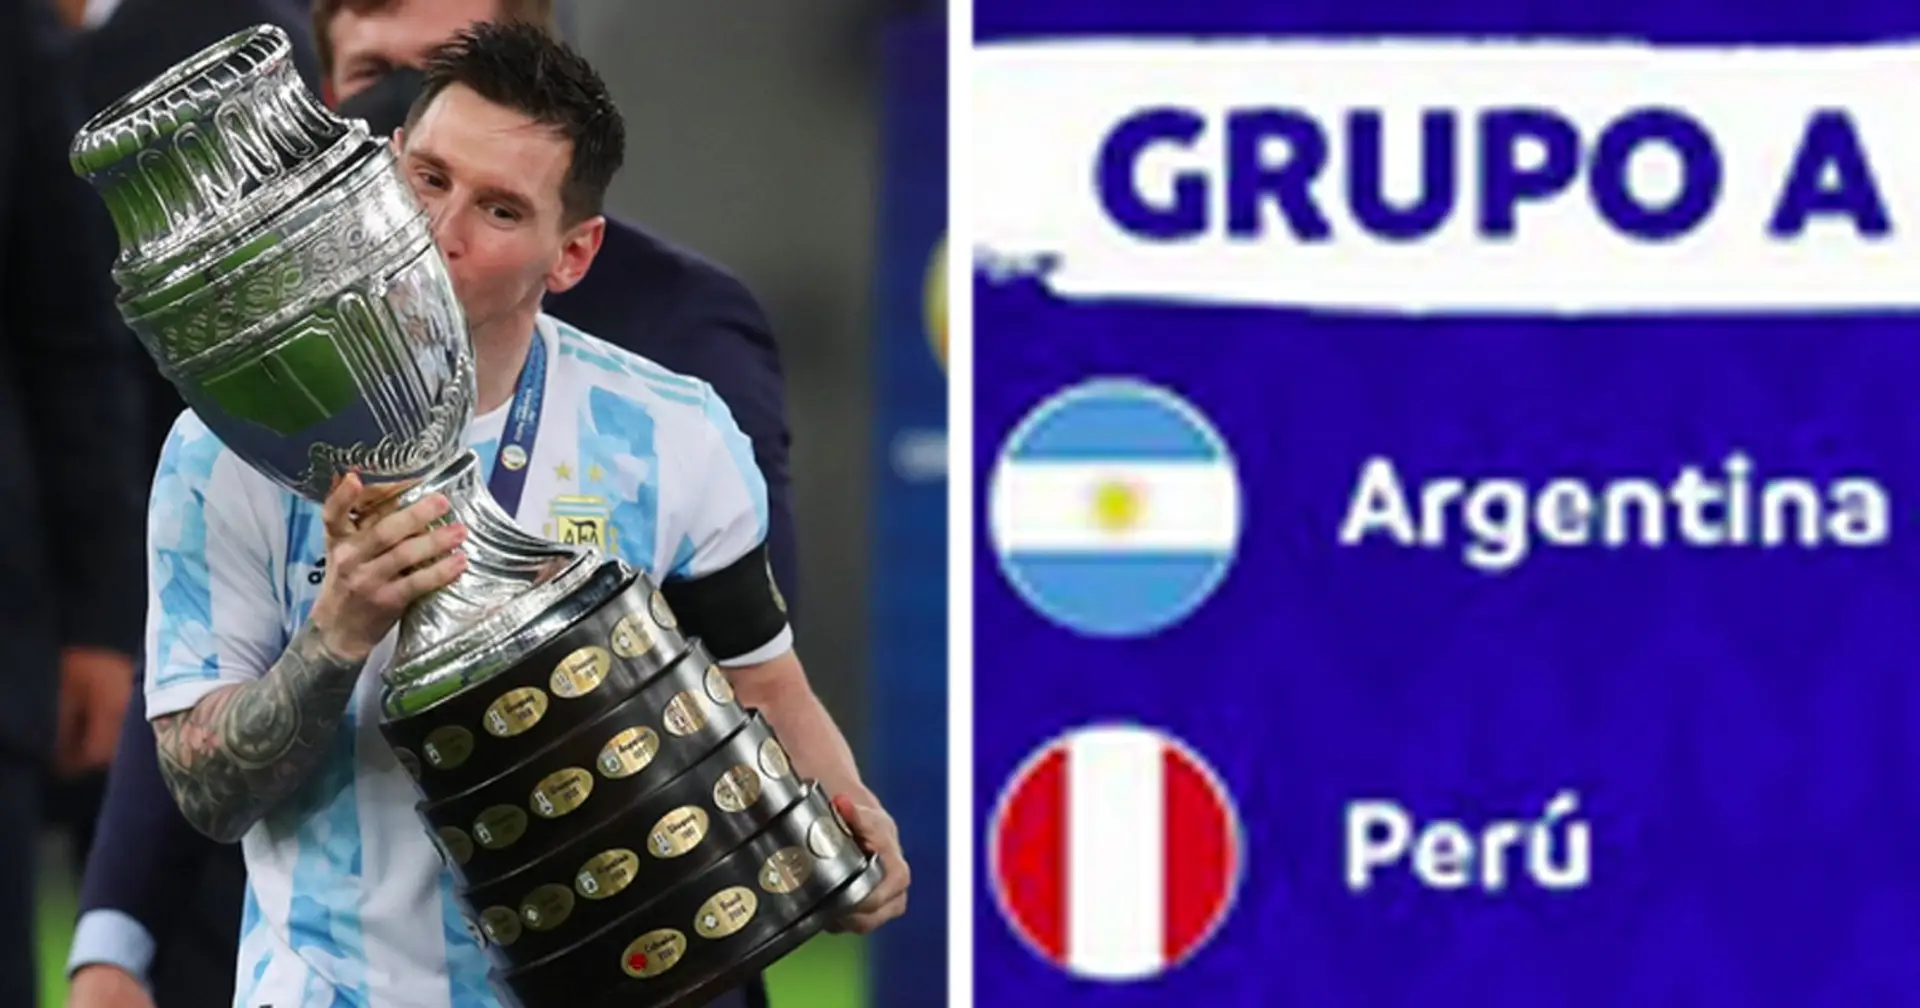 Argentina's Copa America group confirmed – Messi to reunite with his superstar fan